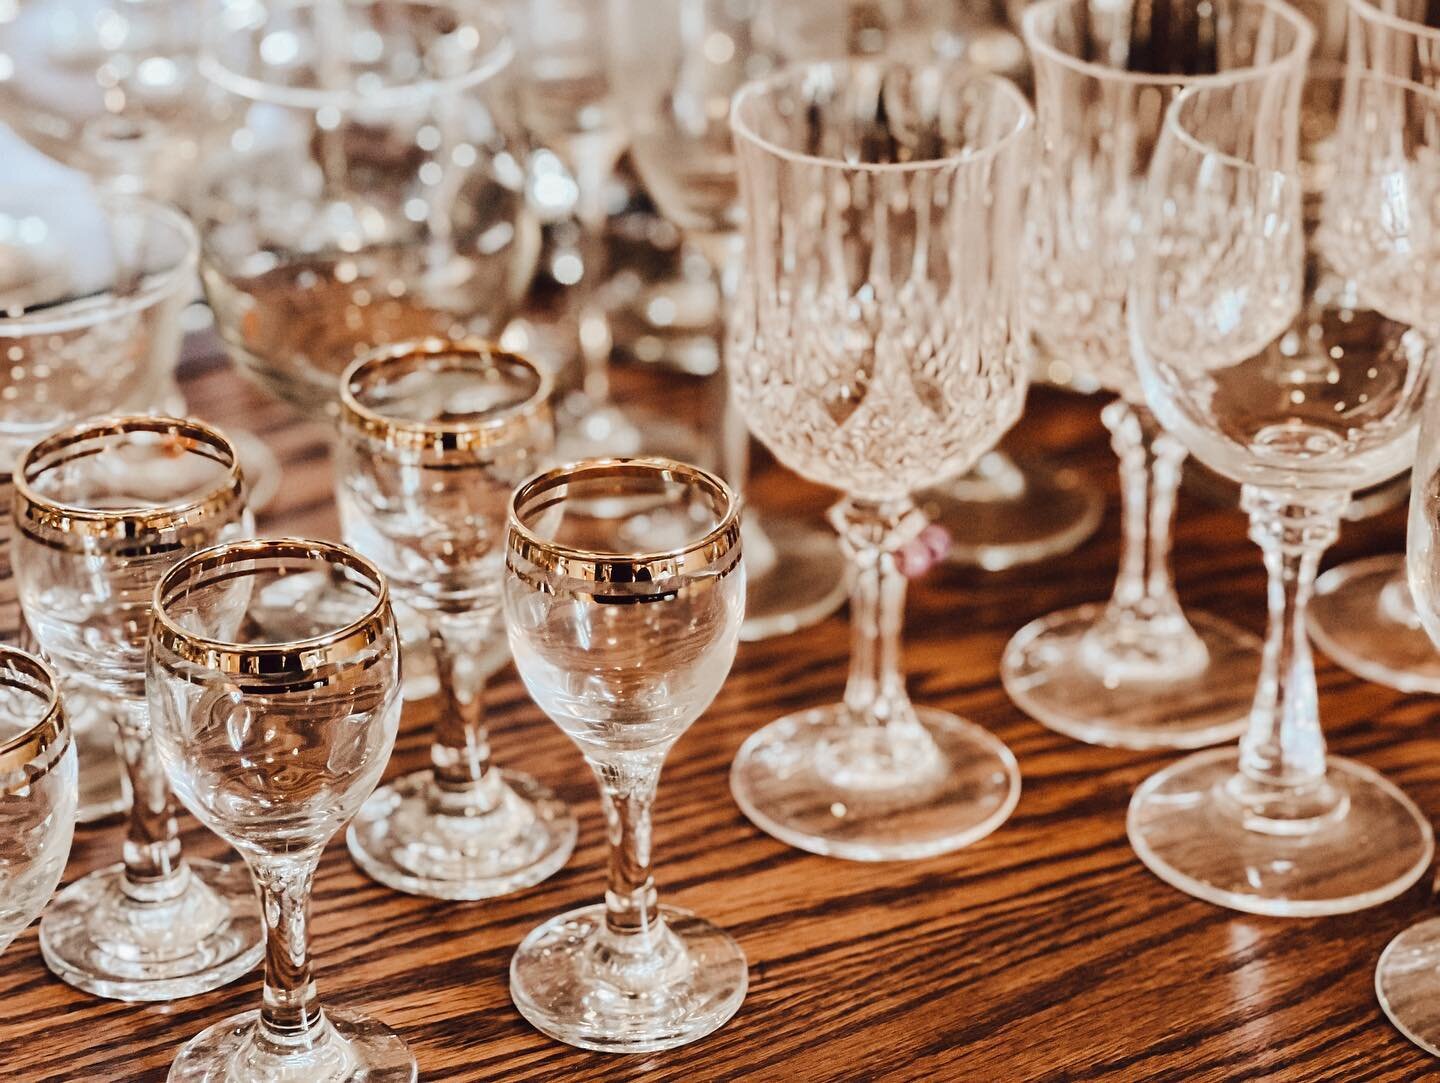 Looking for some gorgeous gold glassware for your next party???&hellip;.We have you covered with our upcoming sales this weekend in Rancho Murieta!! 😍 #estatesalefinds #estatesale #estatesalesnet #estatesales #estatesaleshopping #kitchendecor #glass